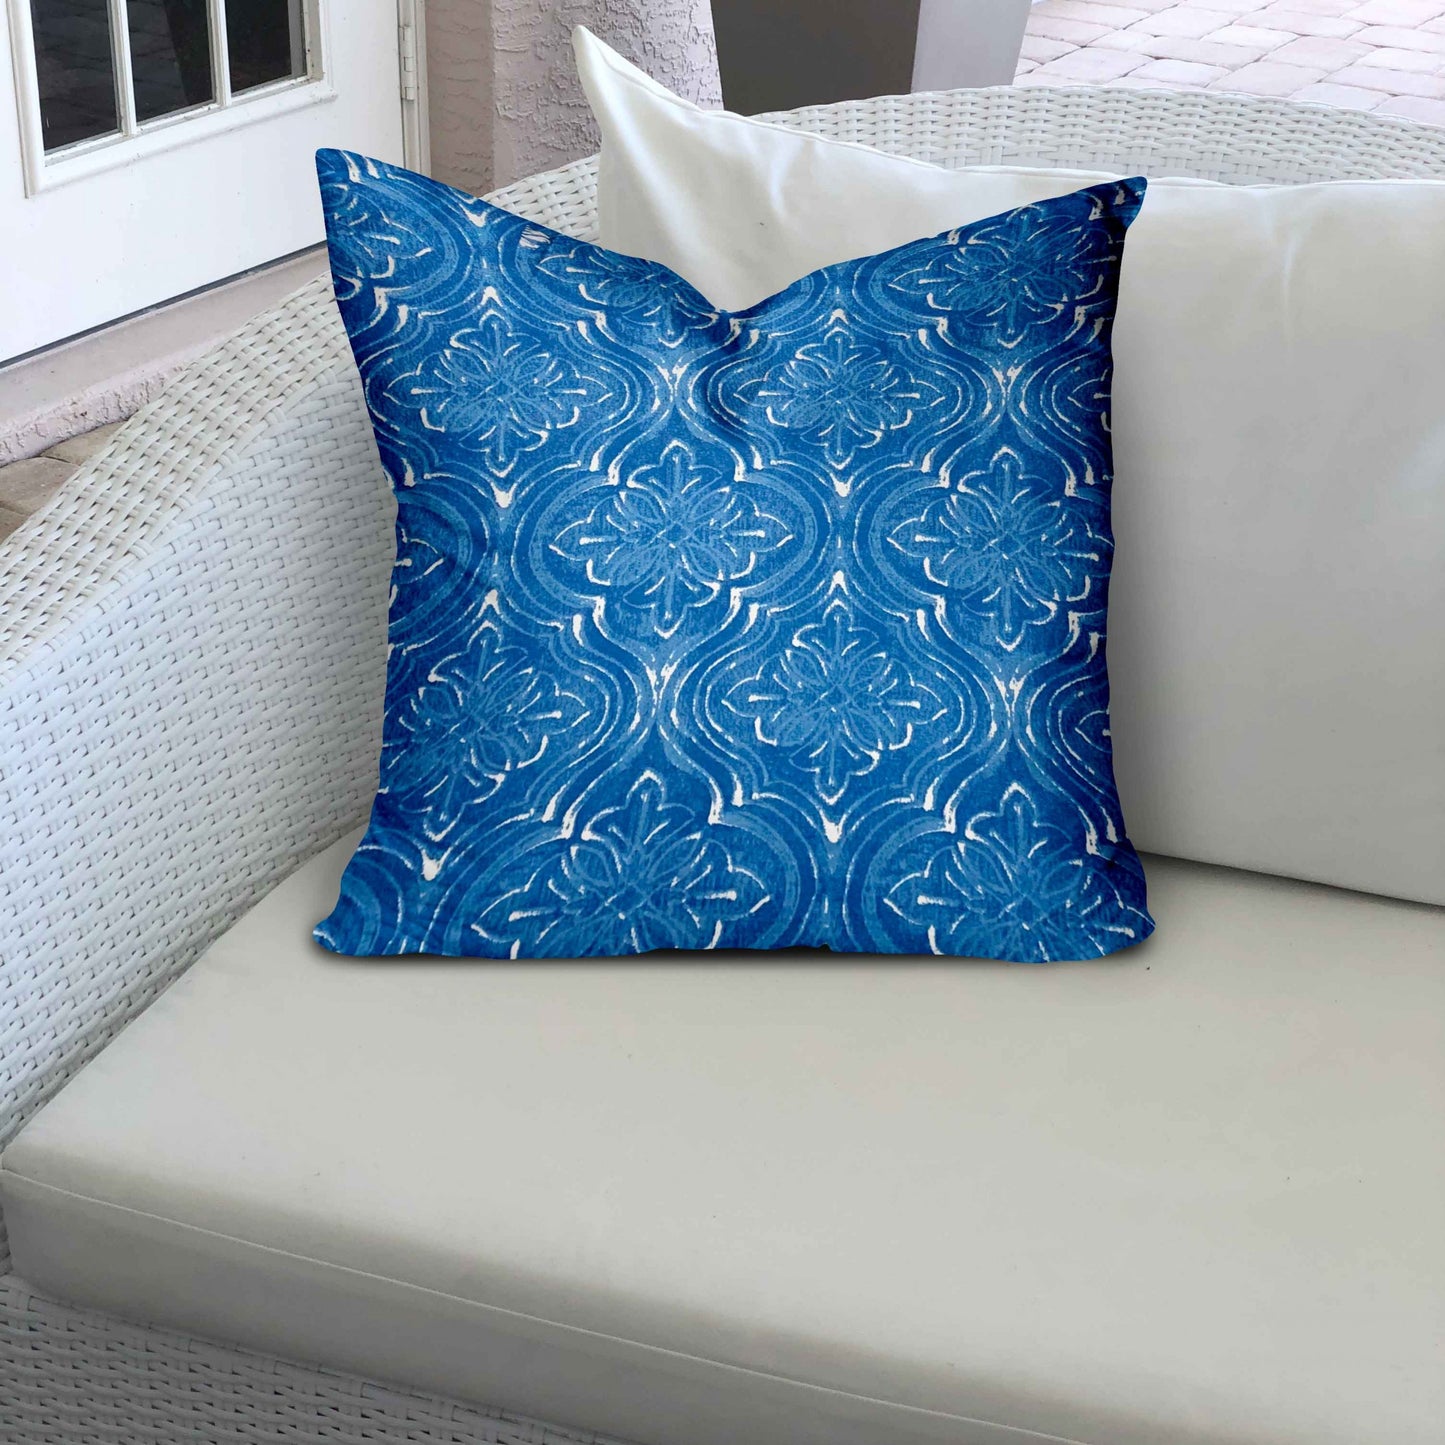 20" X 20" Blue And White Enveloped Ikat Throw Indoor Outdoor Pillow